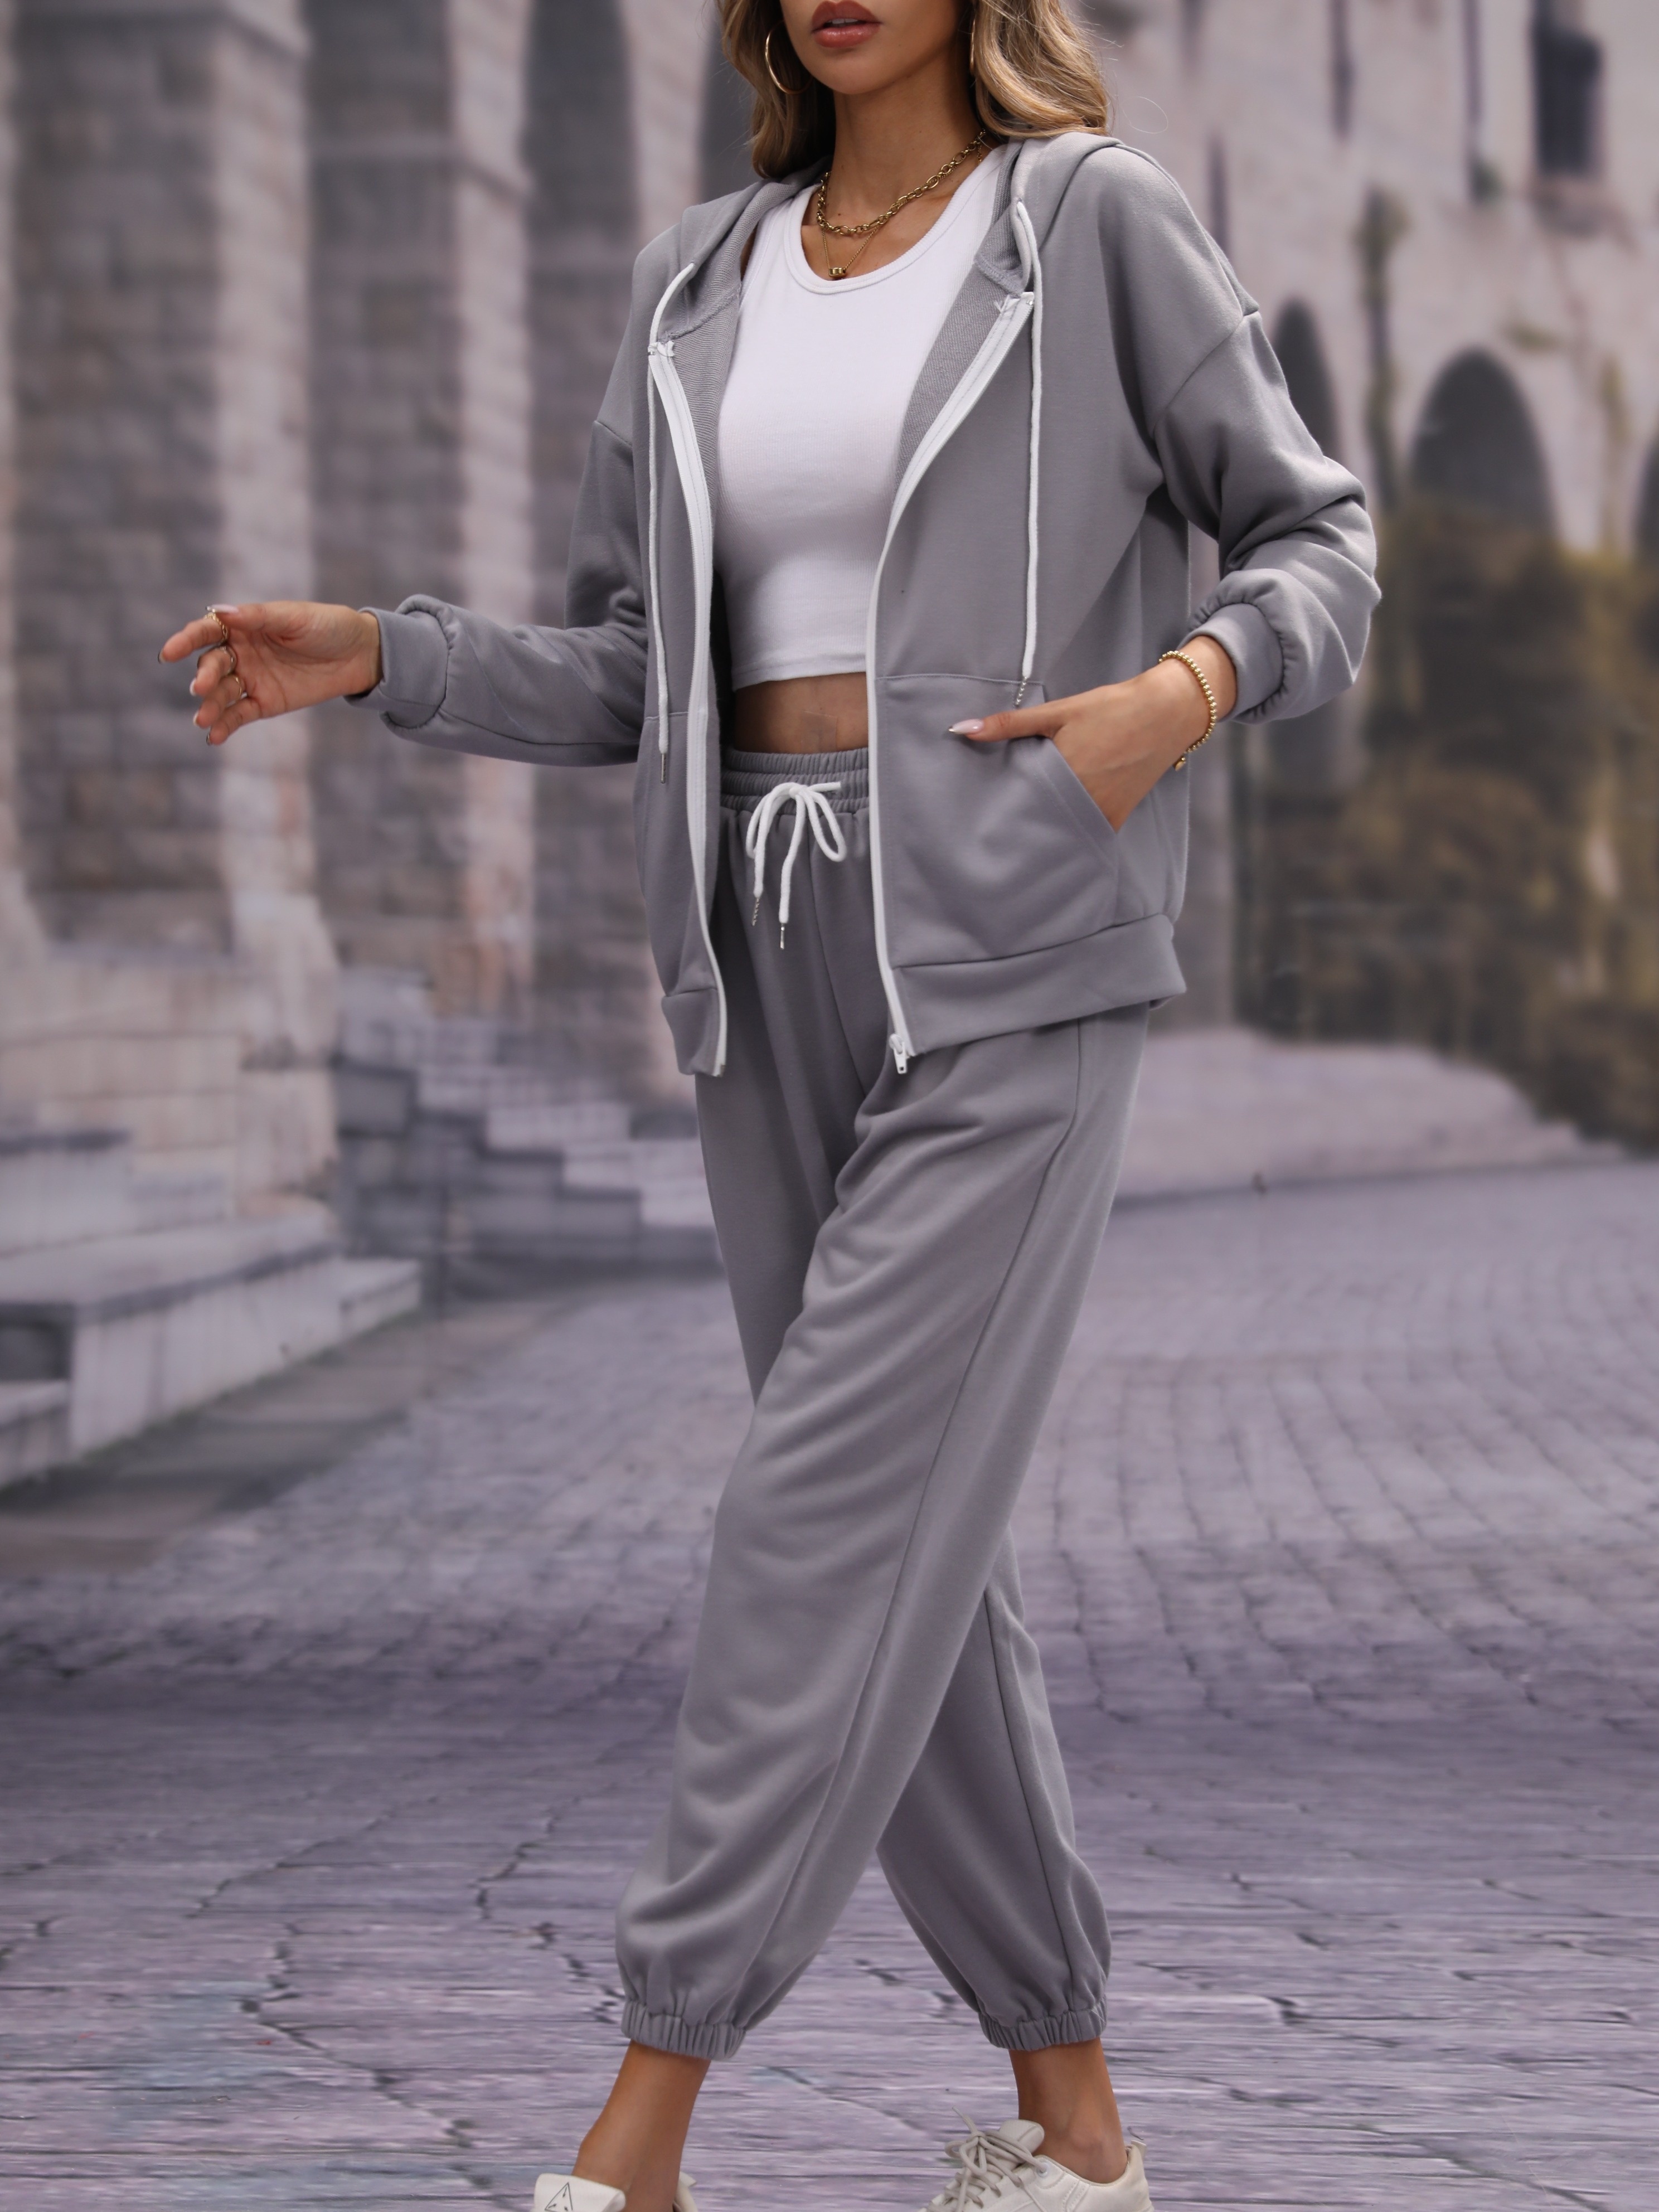 Women's Tracksuits 2Pcs Outfit Sweatsuit Winter Sets Hooded Long Sleeve  Pullover+Sweatpants Casual Pants Sports Activewear Jogger 